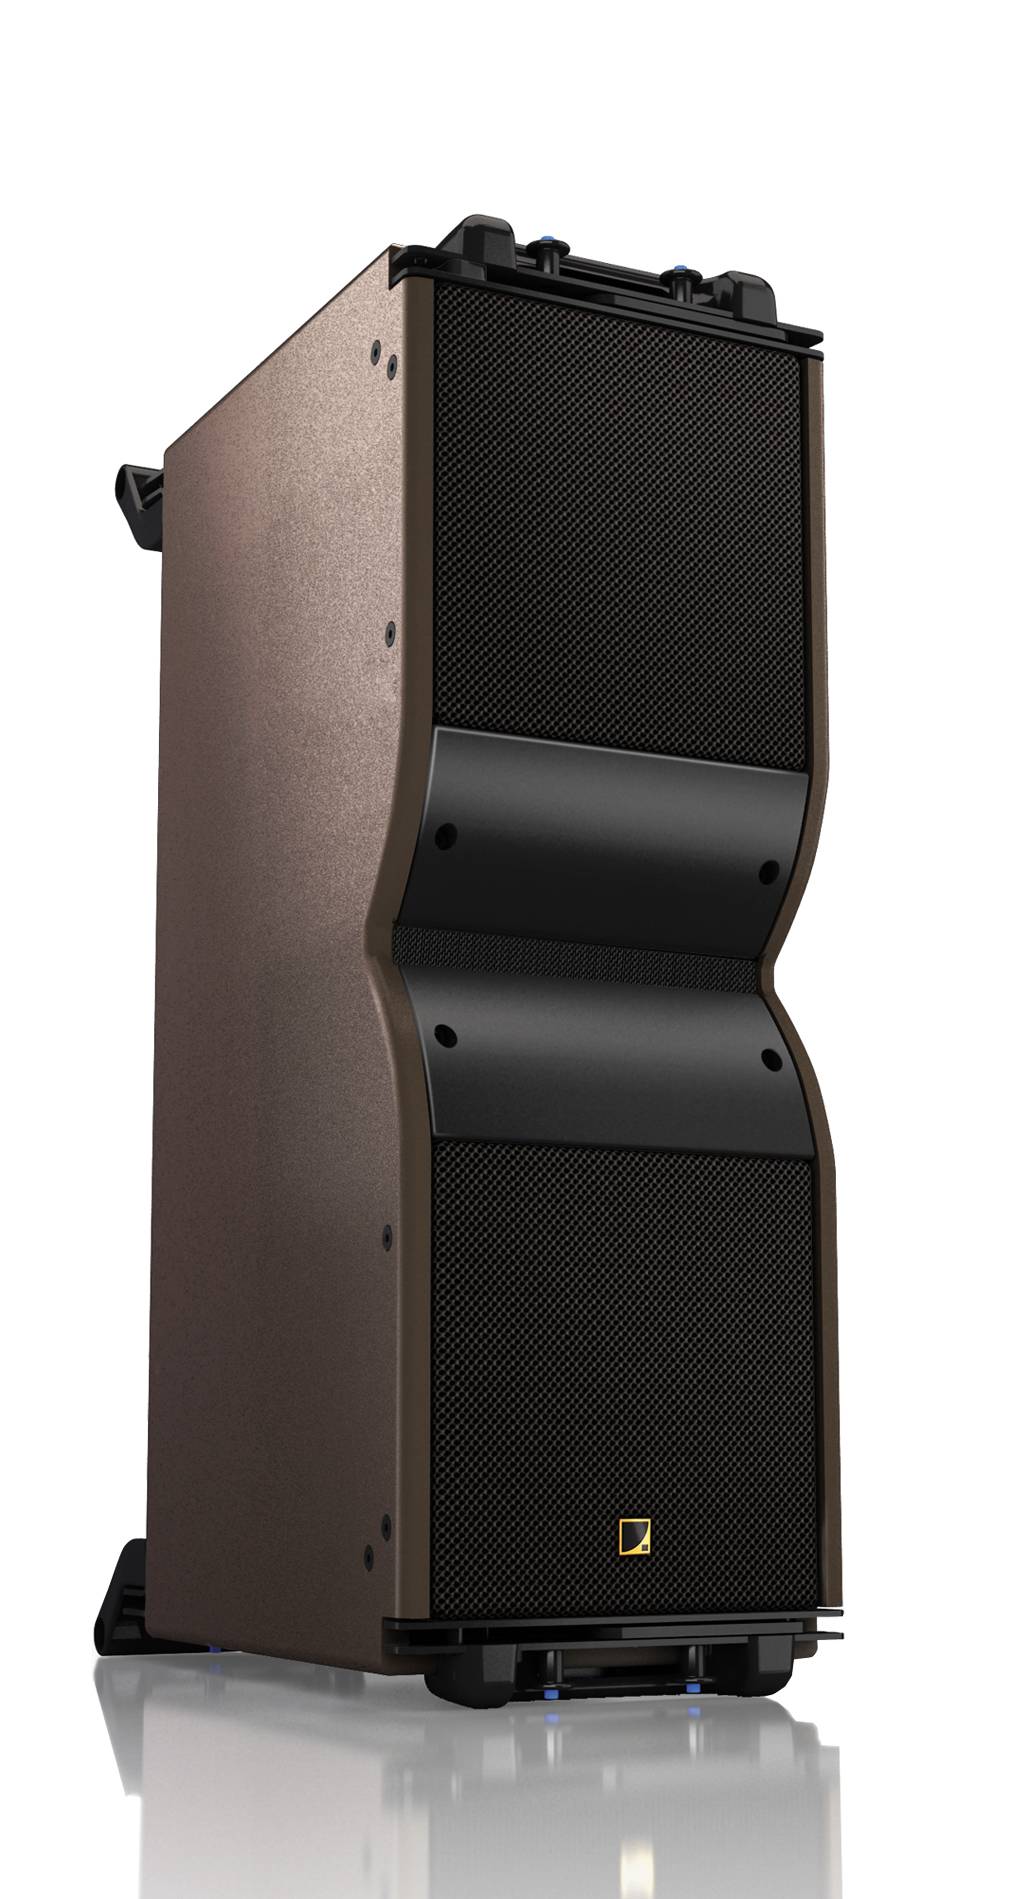 L-Acoustics KARA loudspeaker systems now available for hire